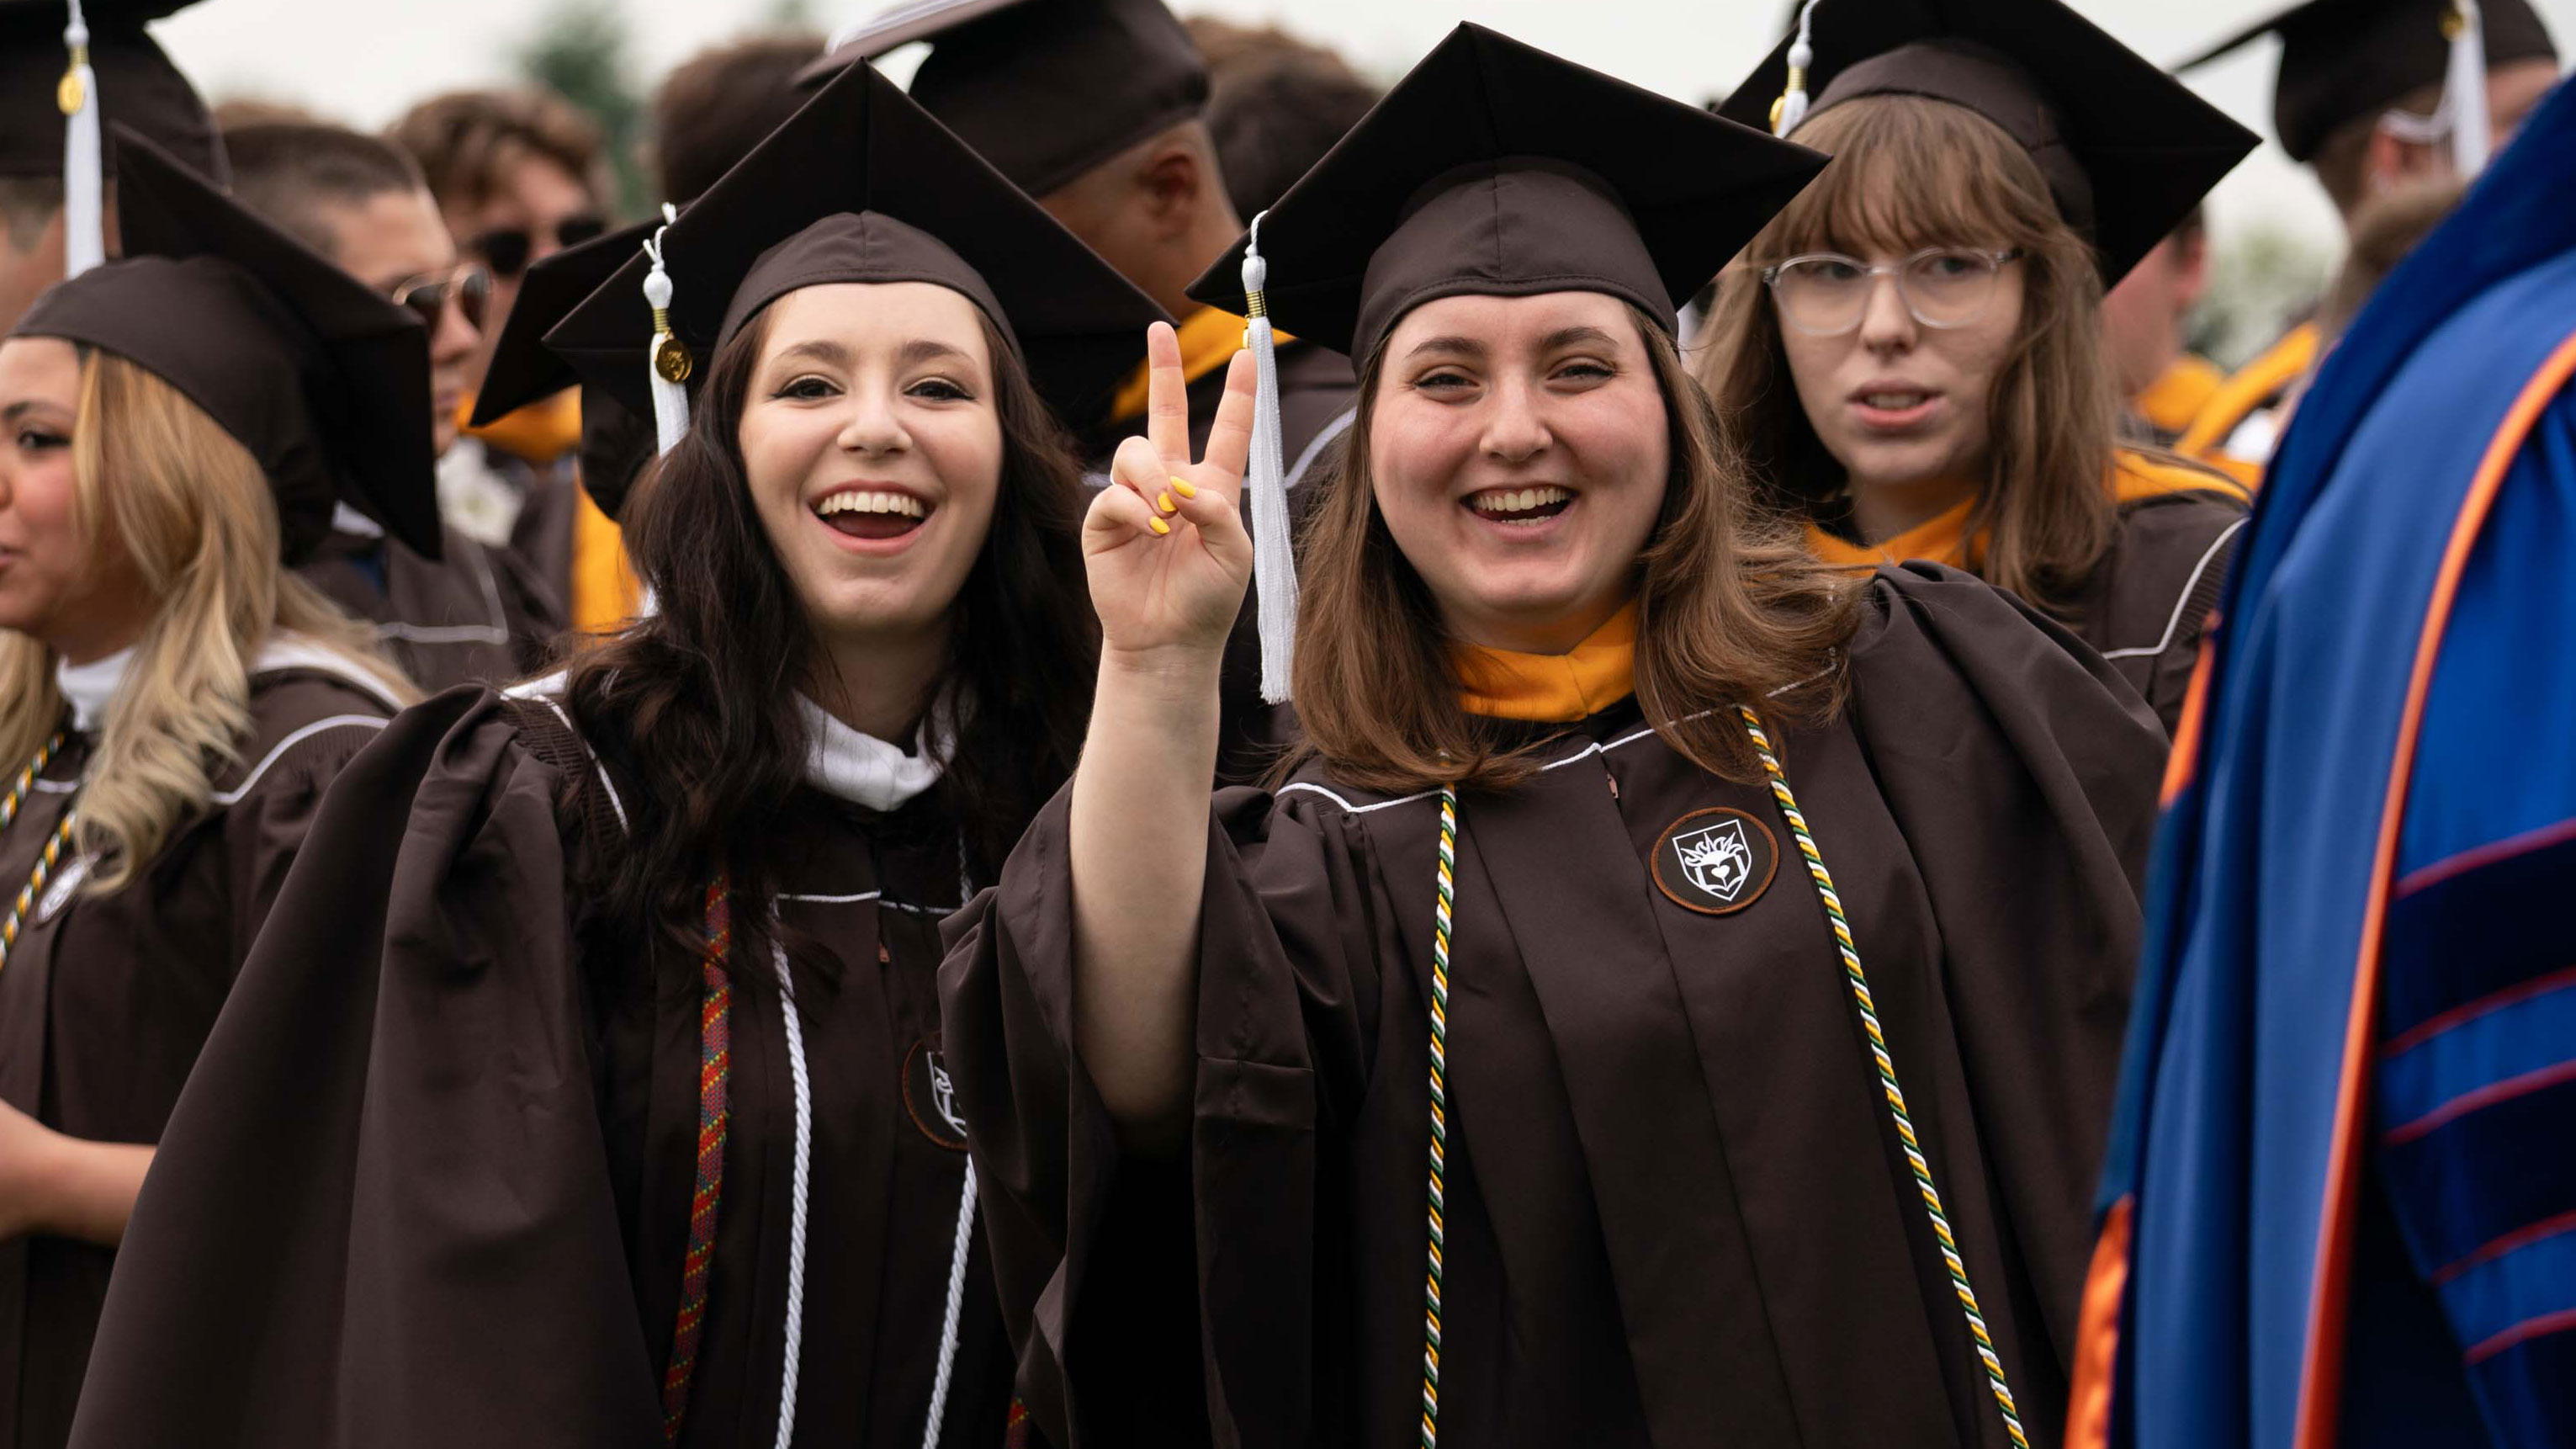 Two female graduates smiling and dressed in their commencement regalia